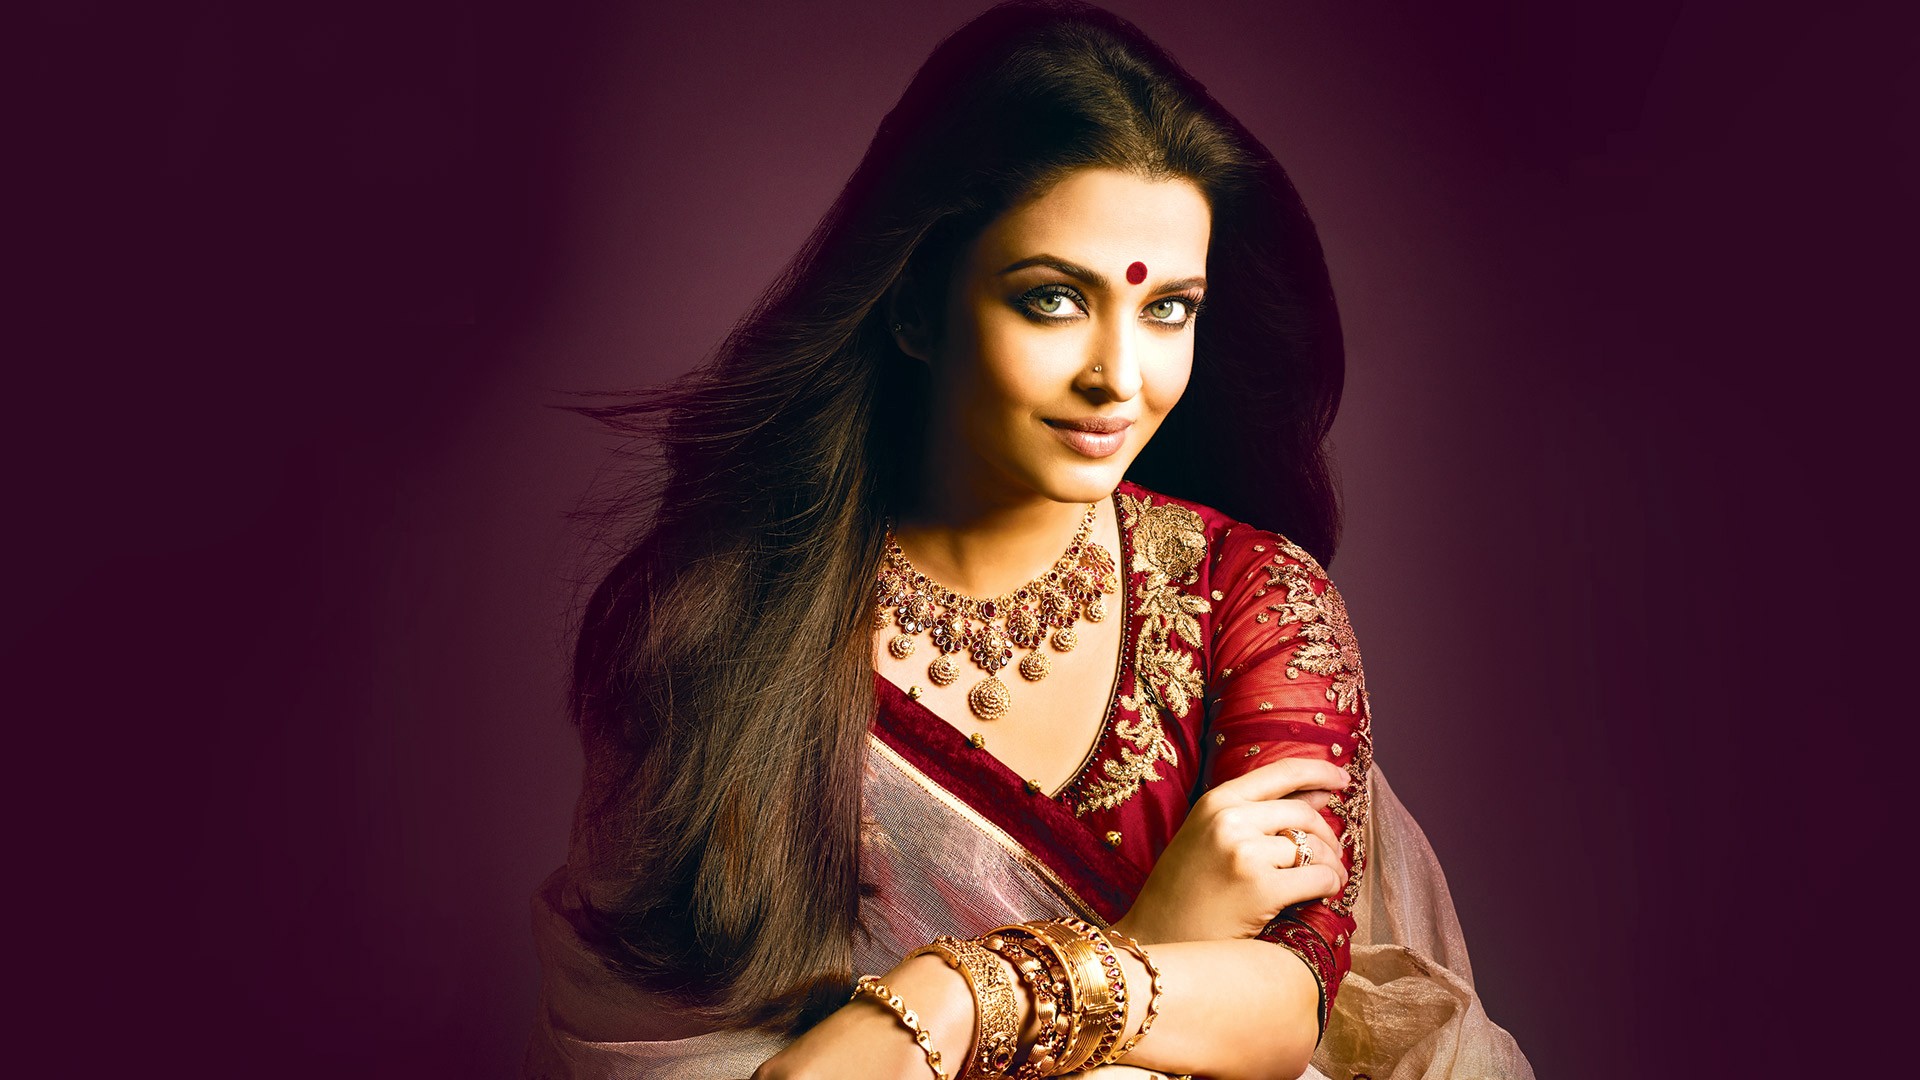 Aishwarya Rai 3, HD Indian Celebrities, 4k Wallpapers, Images, Backgrounds,  Photos and Pictures